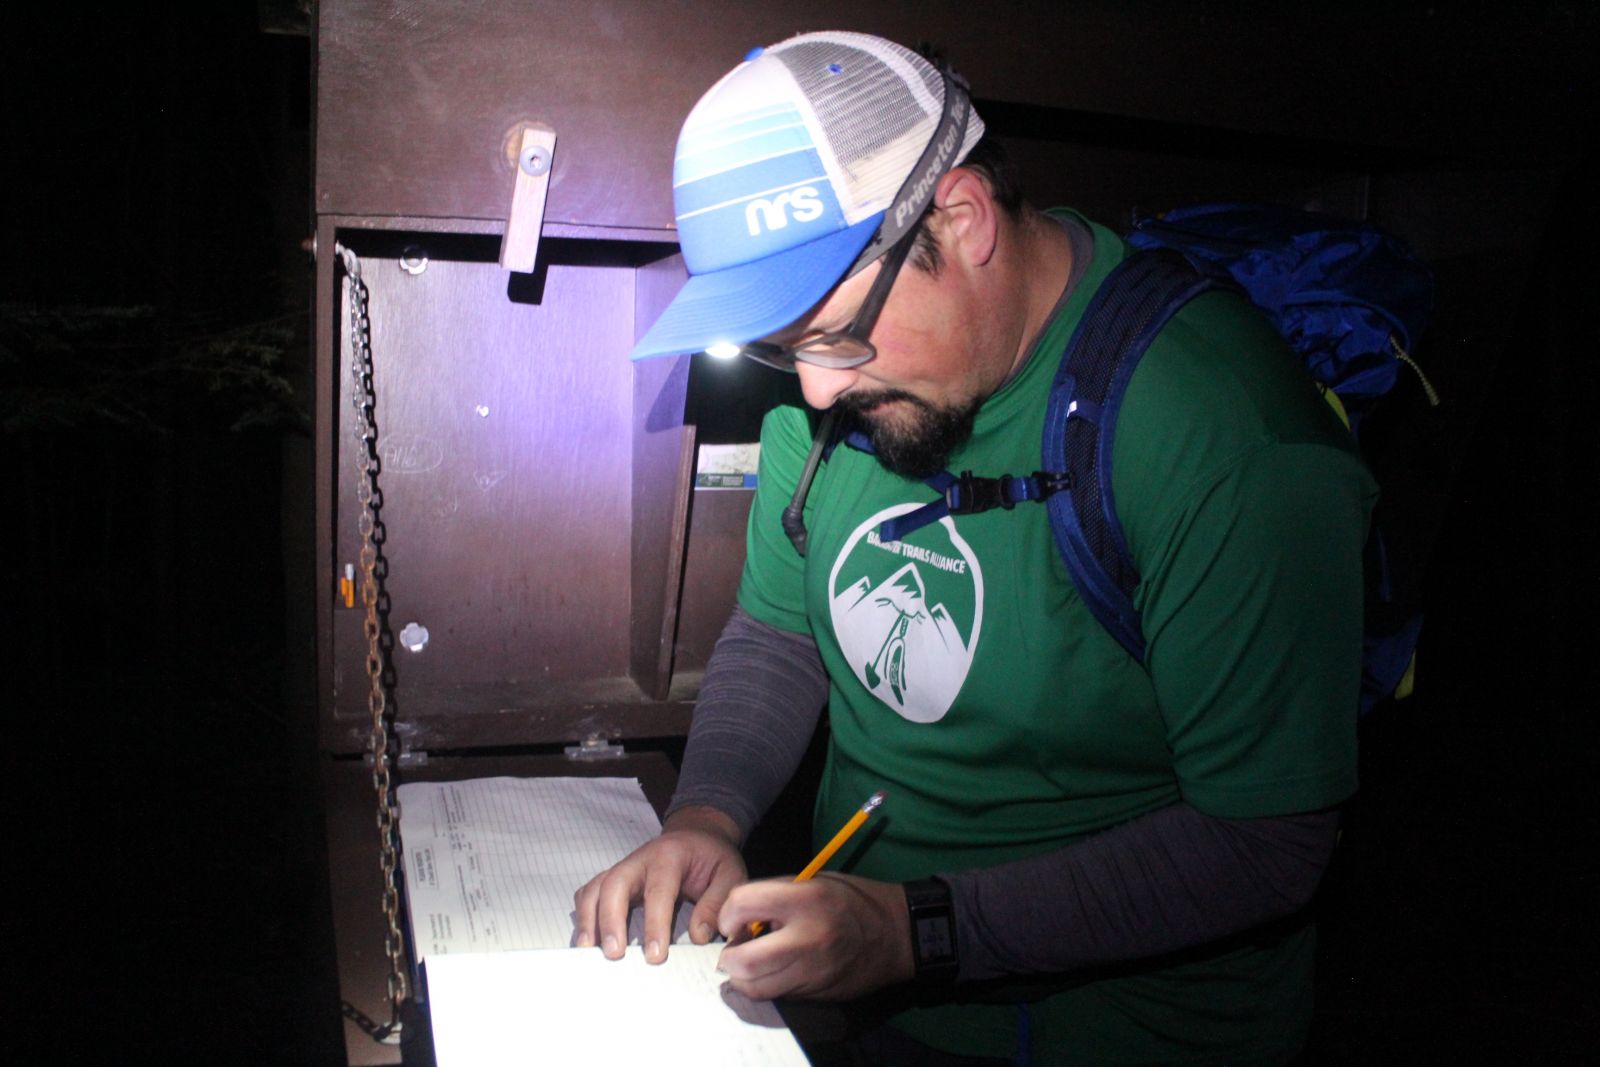 Dan signs the trail register by the light of his headlamp.